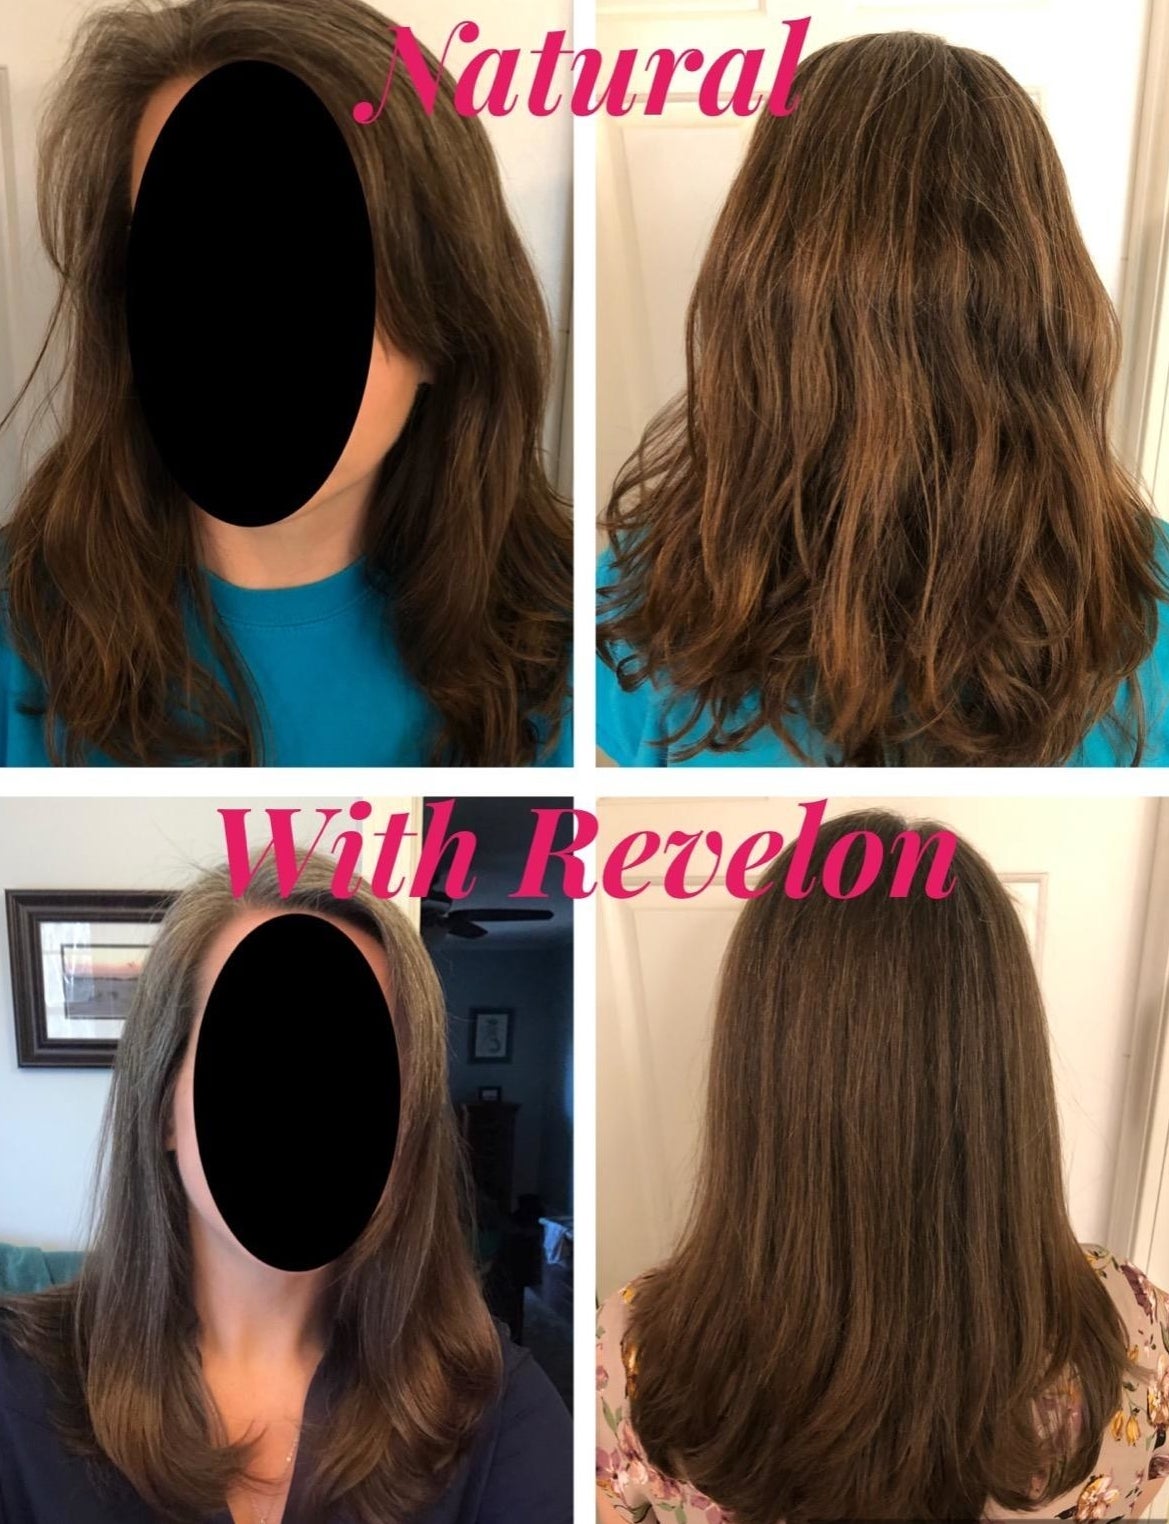 Reviewer&#x27;s collage showing frizzy, wavy hair without revlon (top) compared to smooth, sleek blowout hairstyle with revlon (bottom)